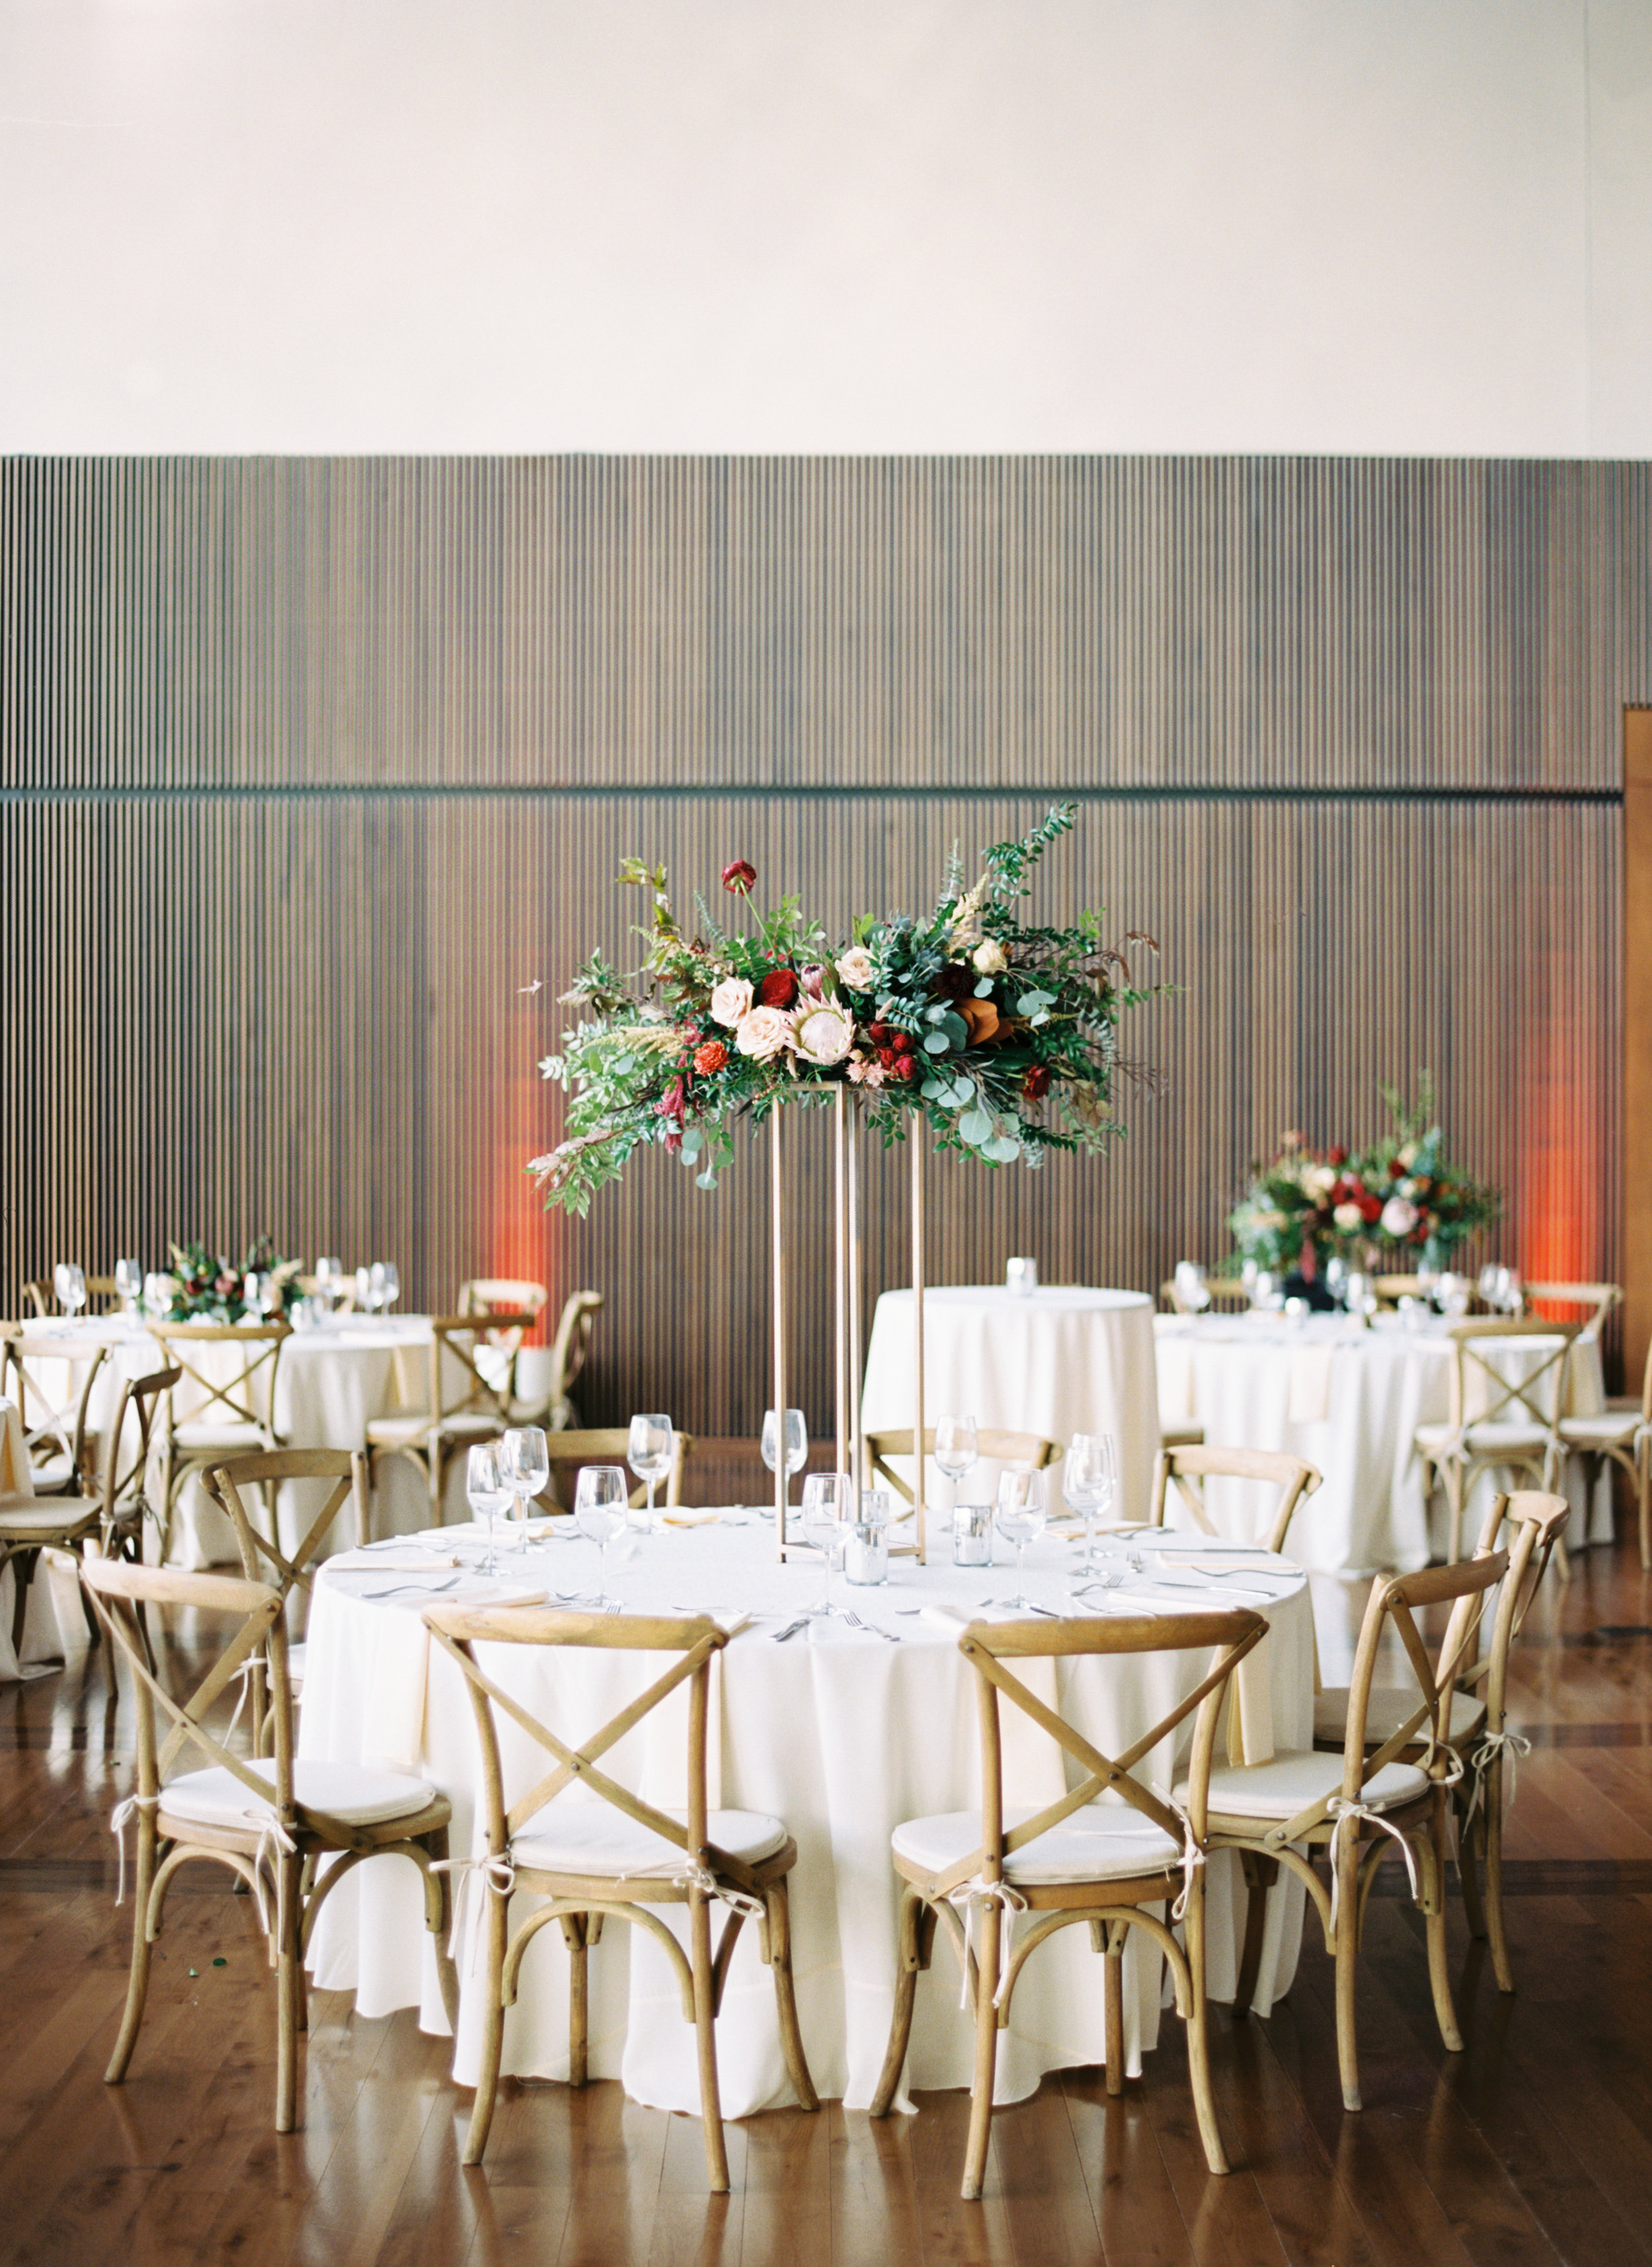 Blush and marsala centerpieces with protea, ranunculus, and lush greenery // Country Music Hall of Fame Wedding, Nashville